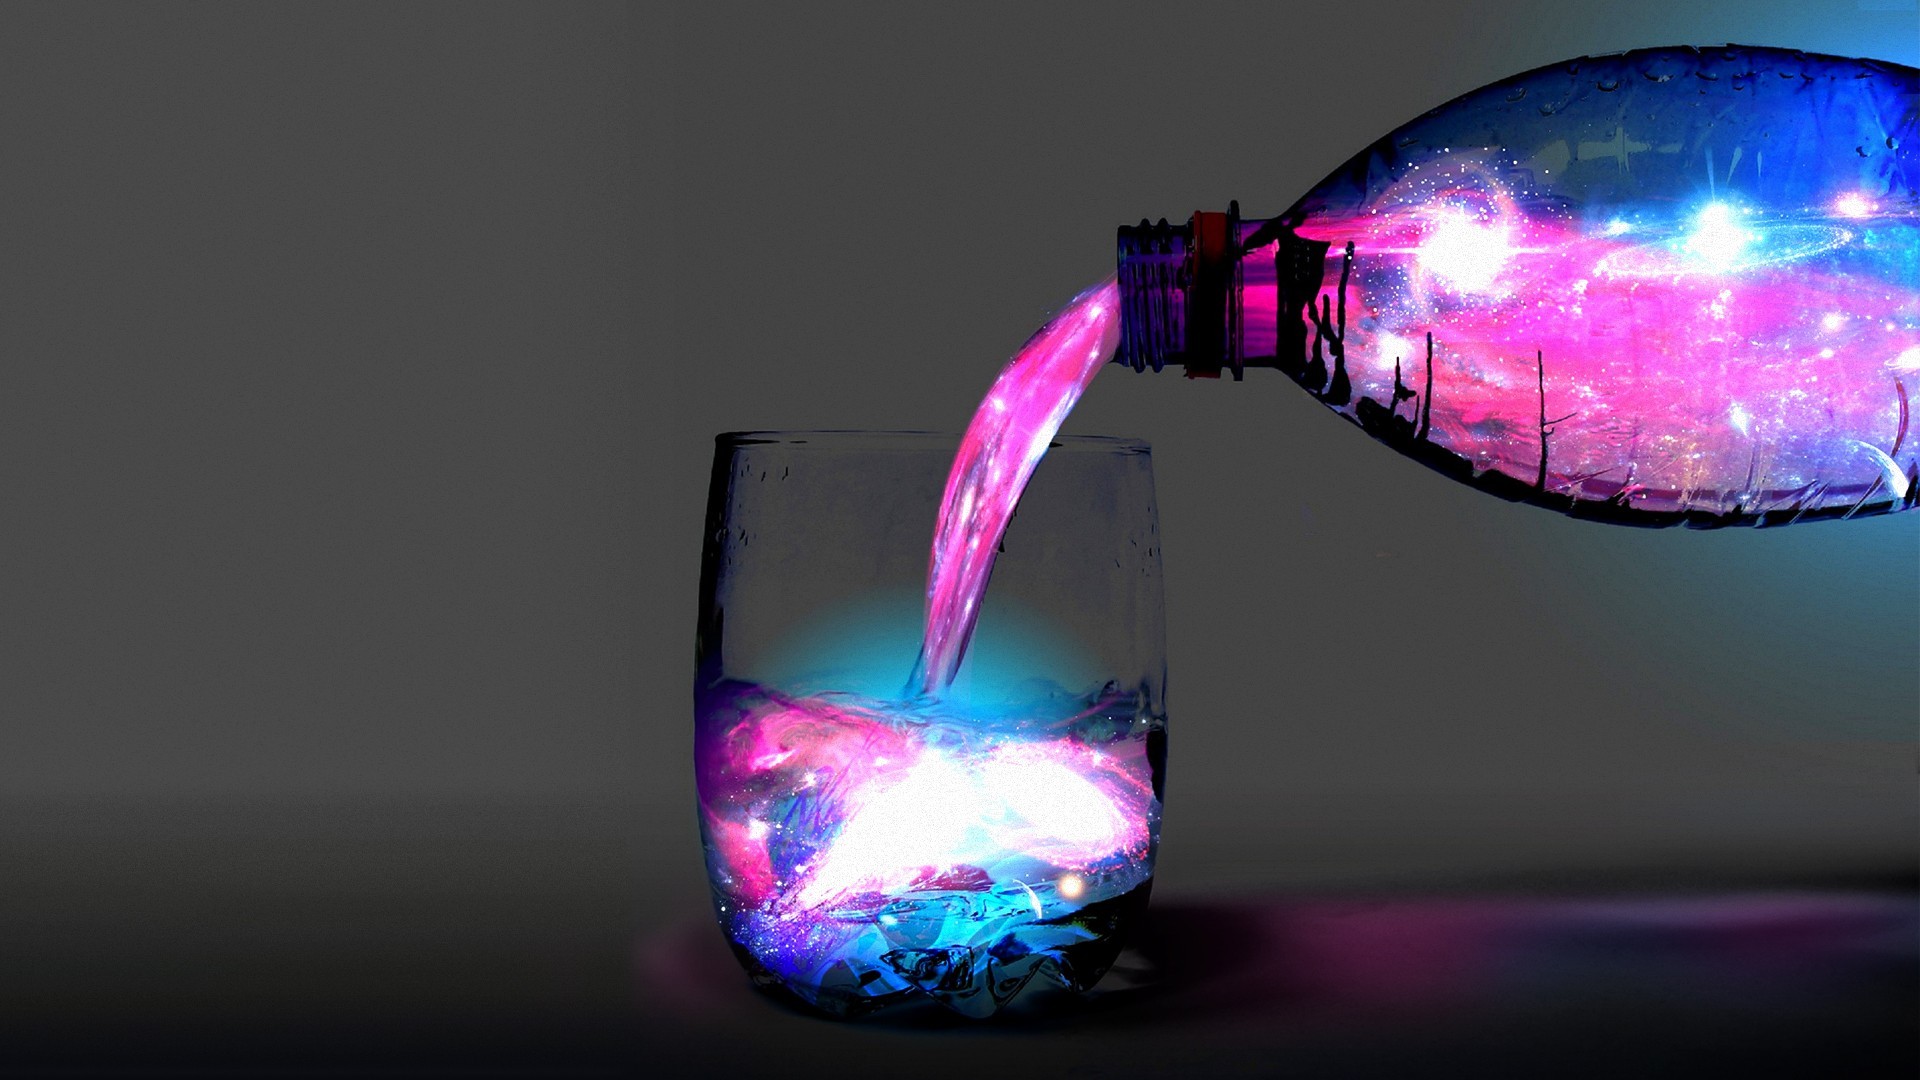 1920x1080 Cool Wallpapers, Illuminated Water